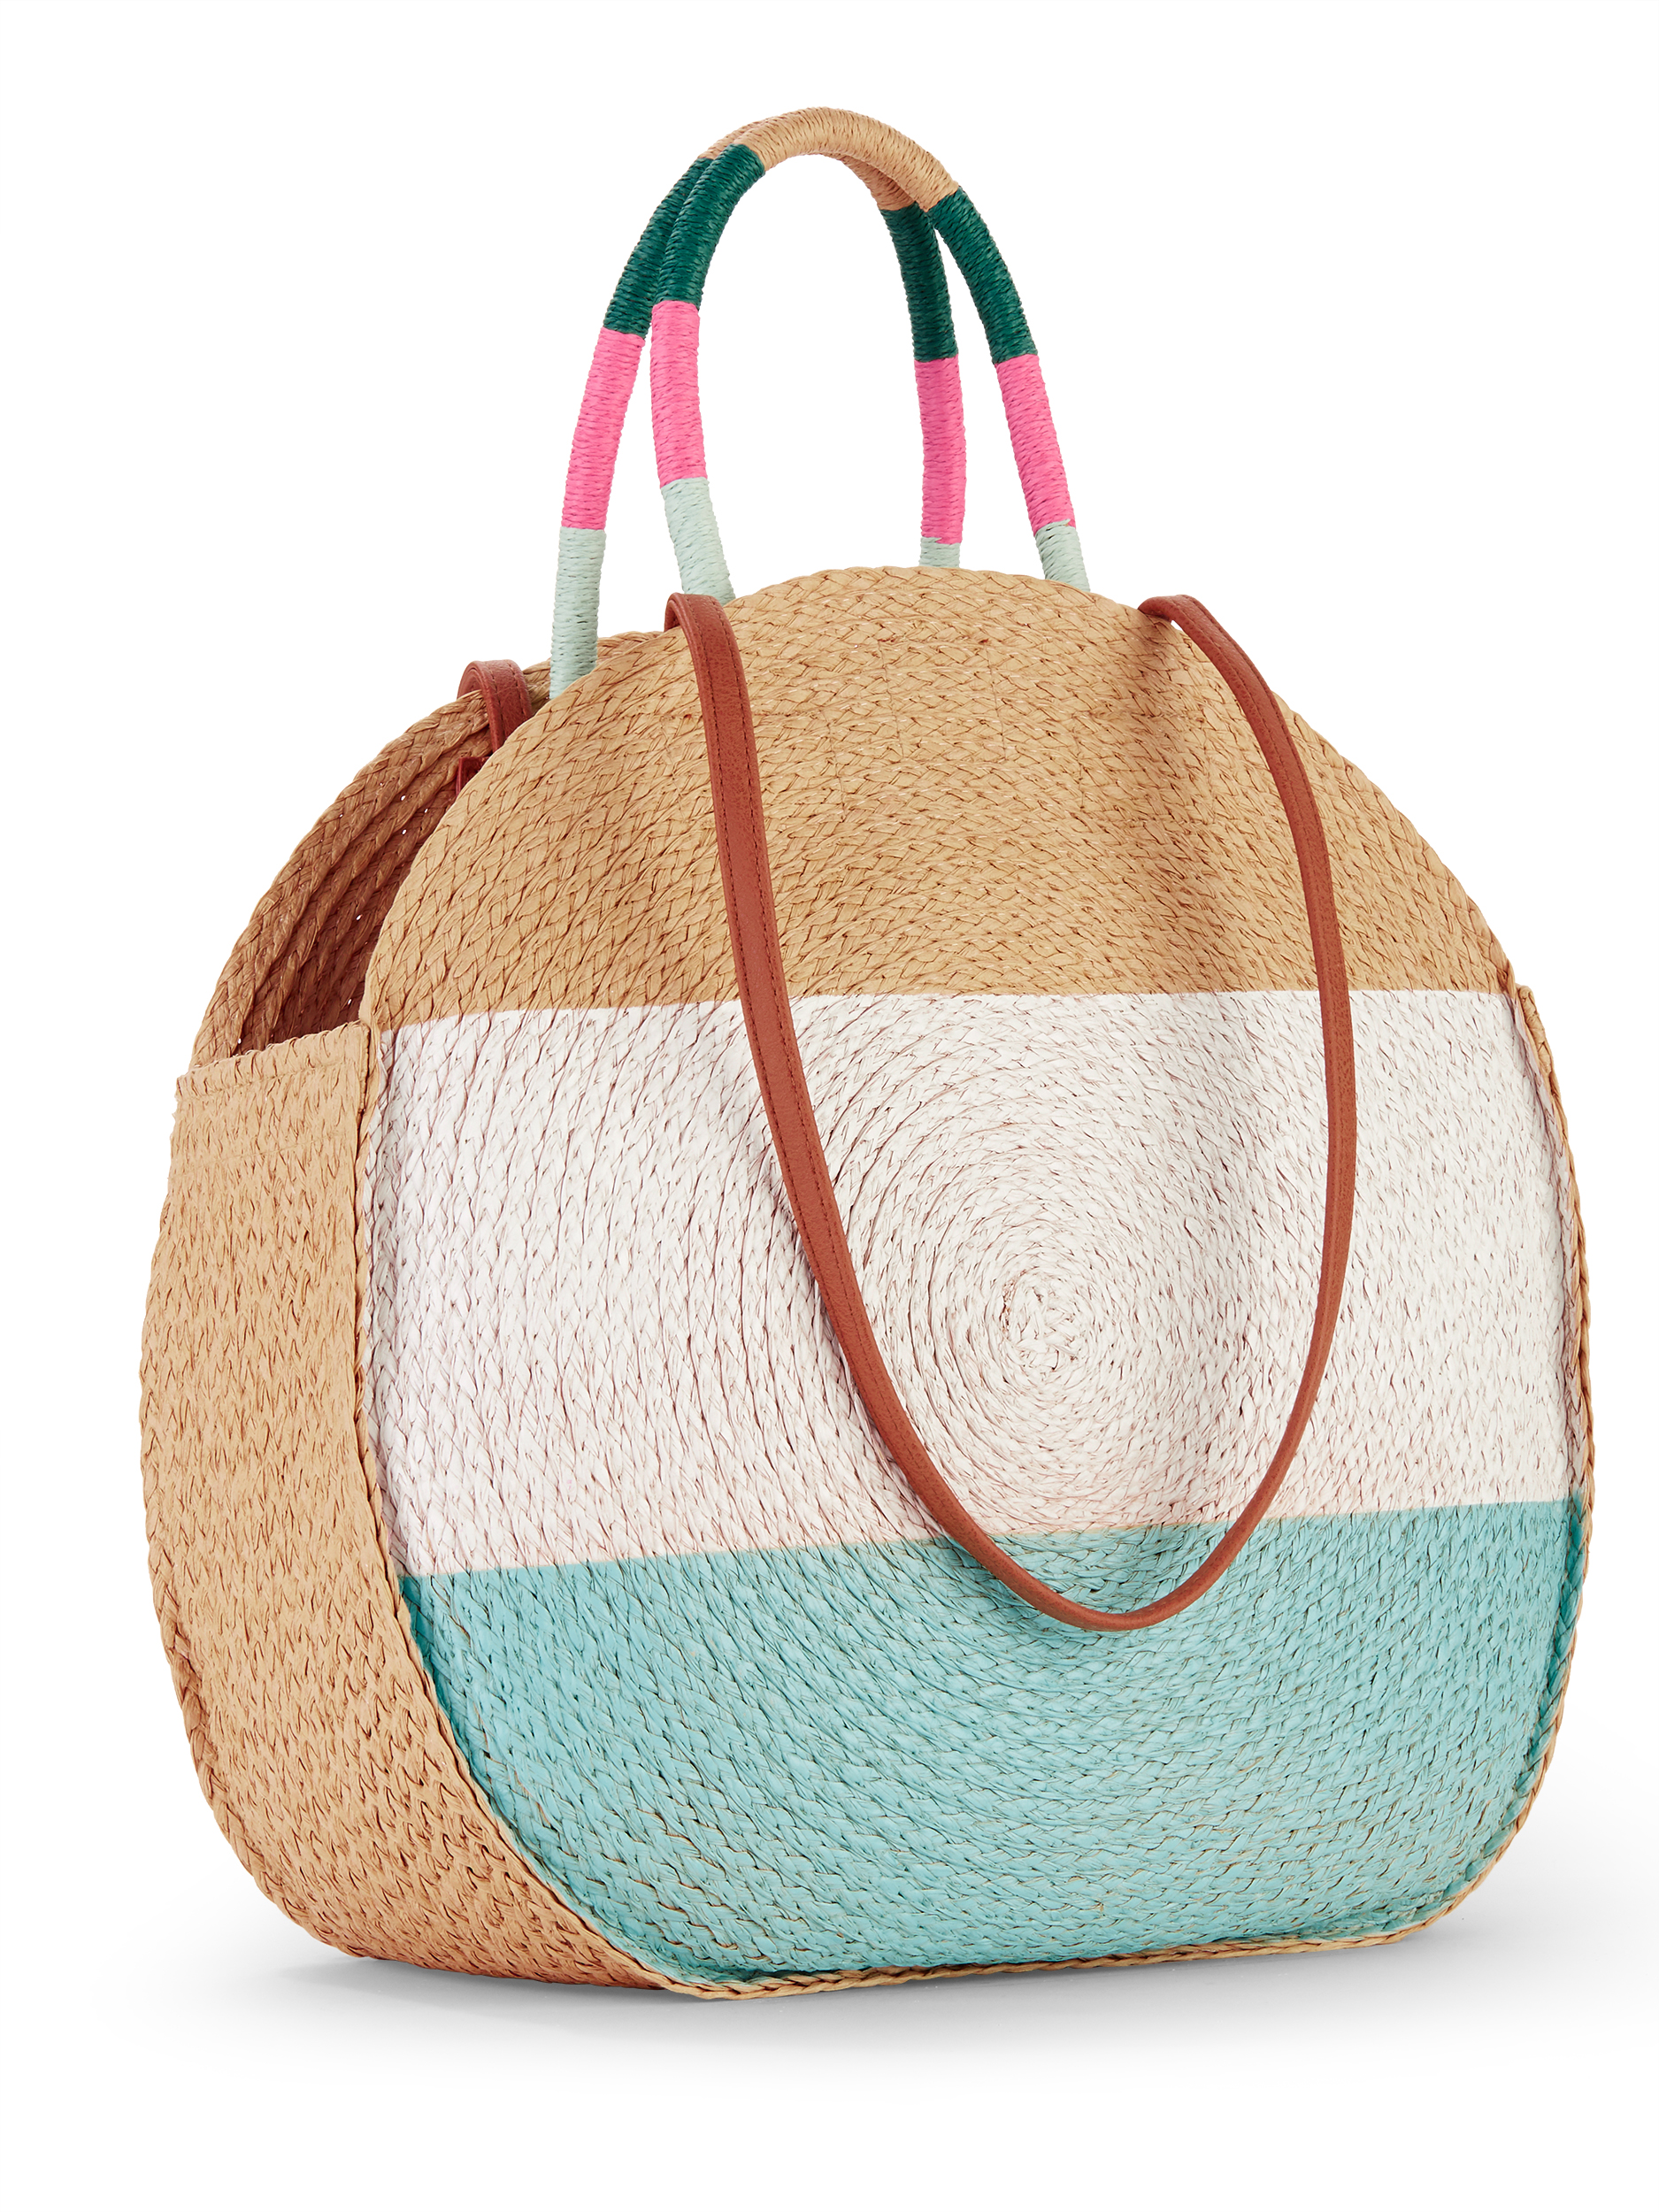 Time and Tru Women's Striped Straw Circle Tote Bag with Inner Slip Pocket Mint Multi - image 3 of 6